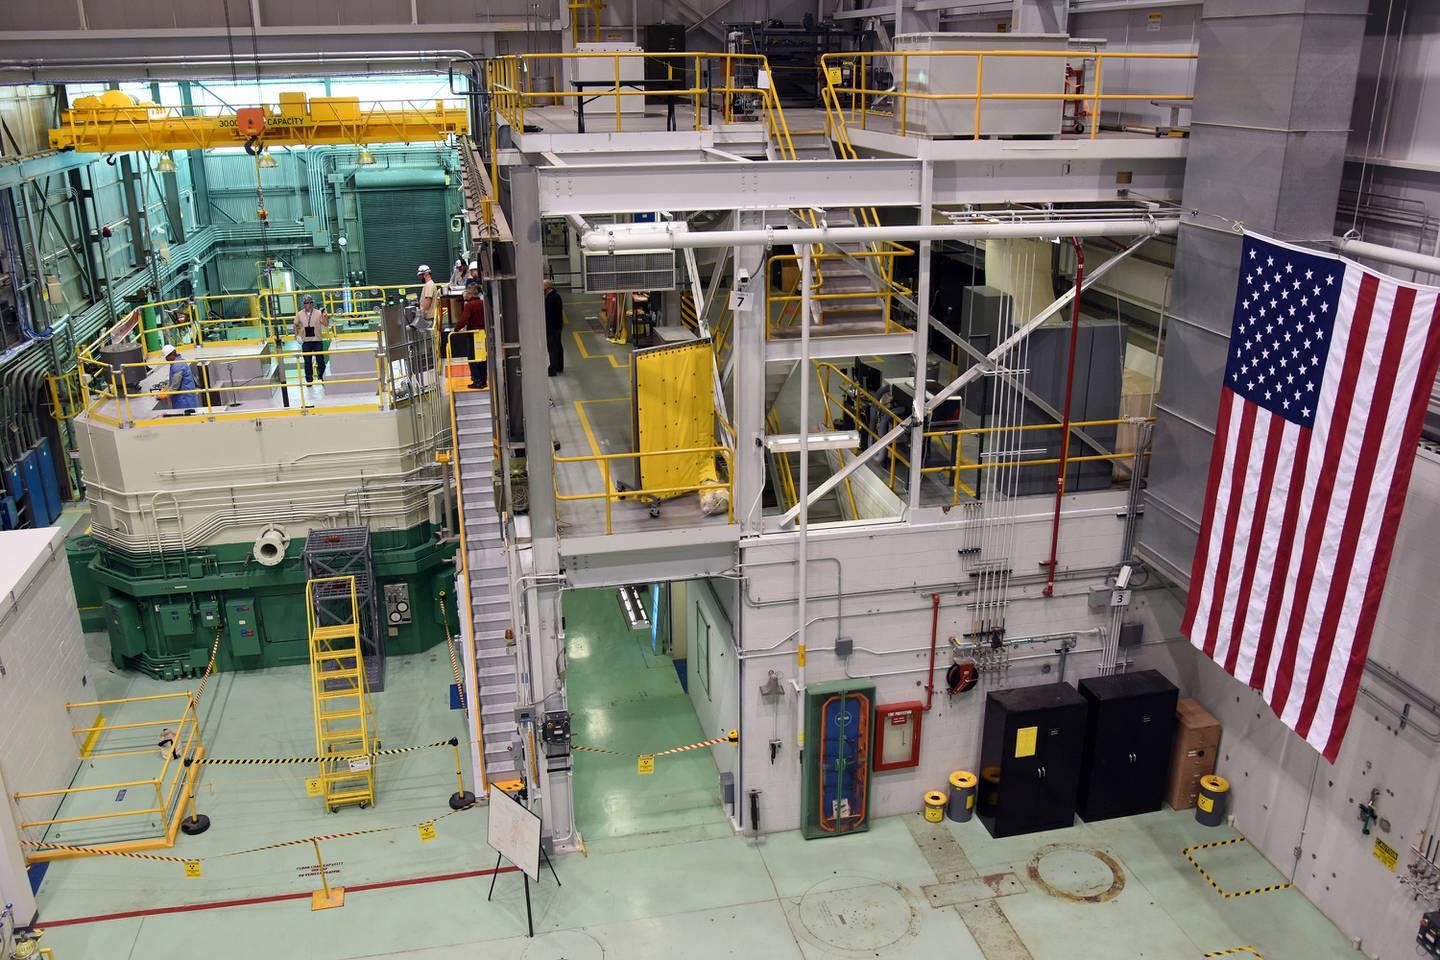 The Idaho National Laboratory Transient Reactor Test Facility in Idaho Falls, Idaho, is shown Nov. 14, 2017. The Pentagon wants to build a prototype advanced mobile nuclear microreactor at the Idaho National Laboratory. (C Pentagon to build nuclear microreactors to power far-flung bases